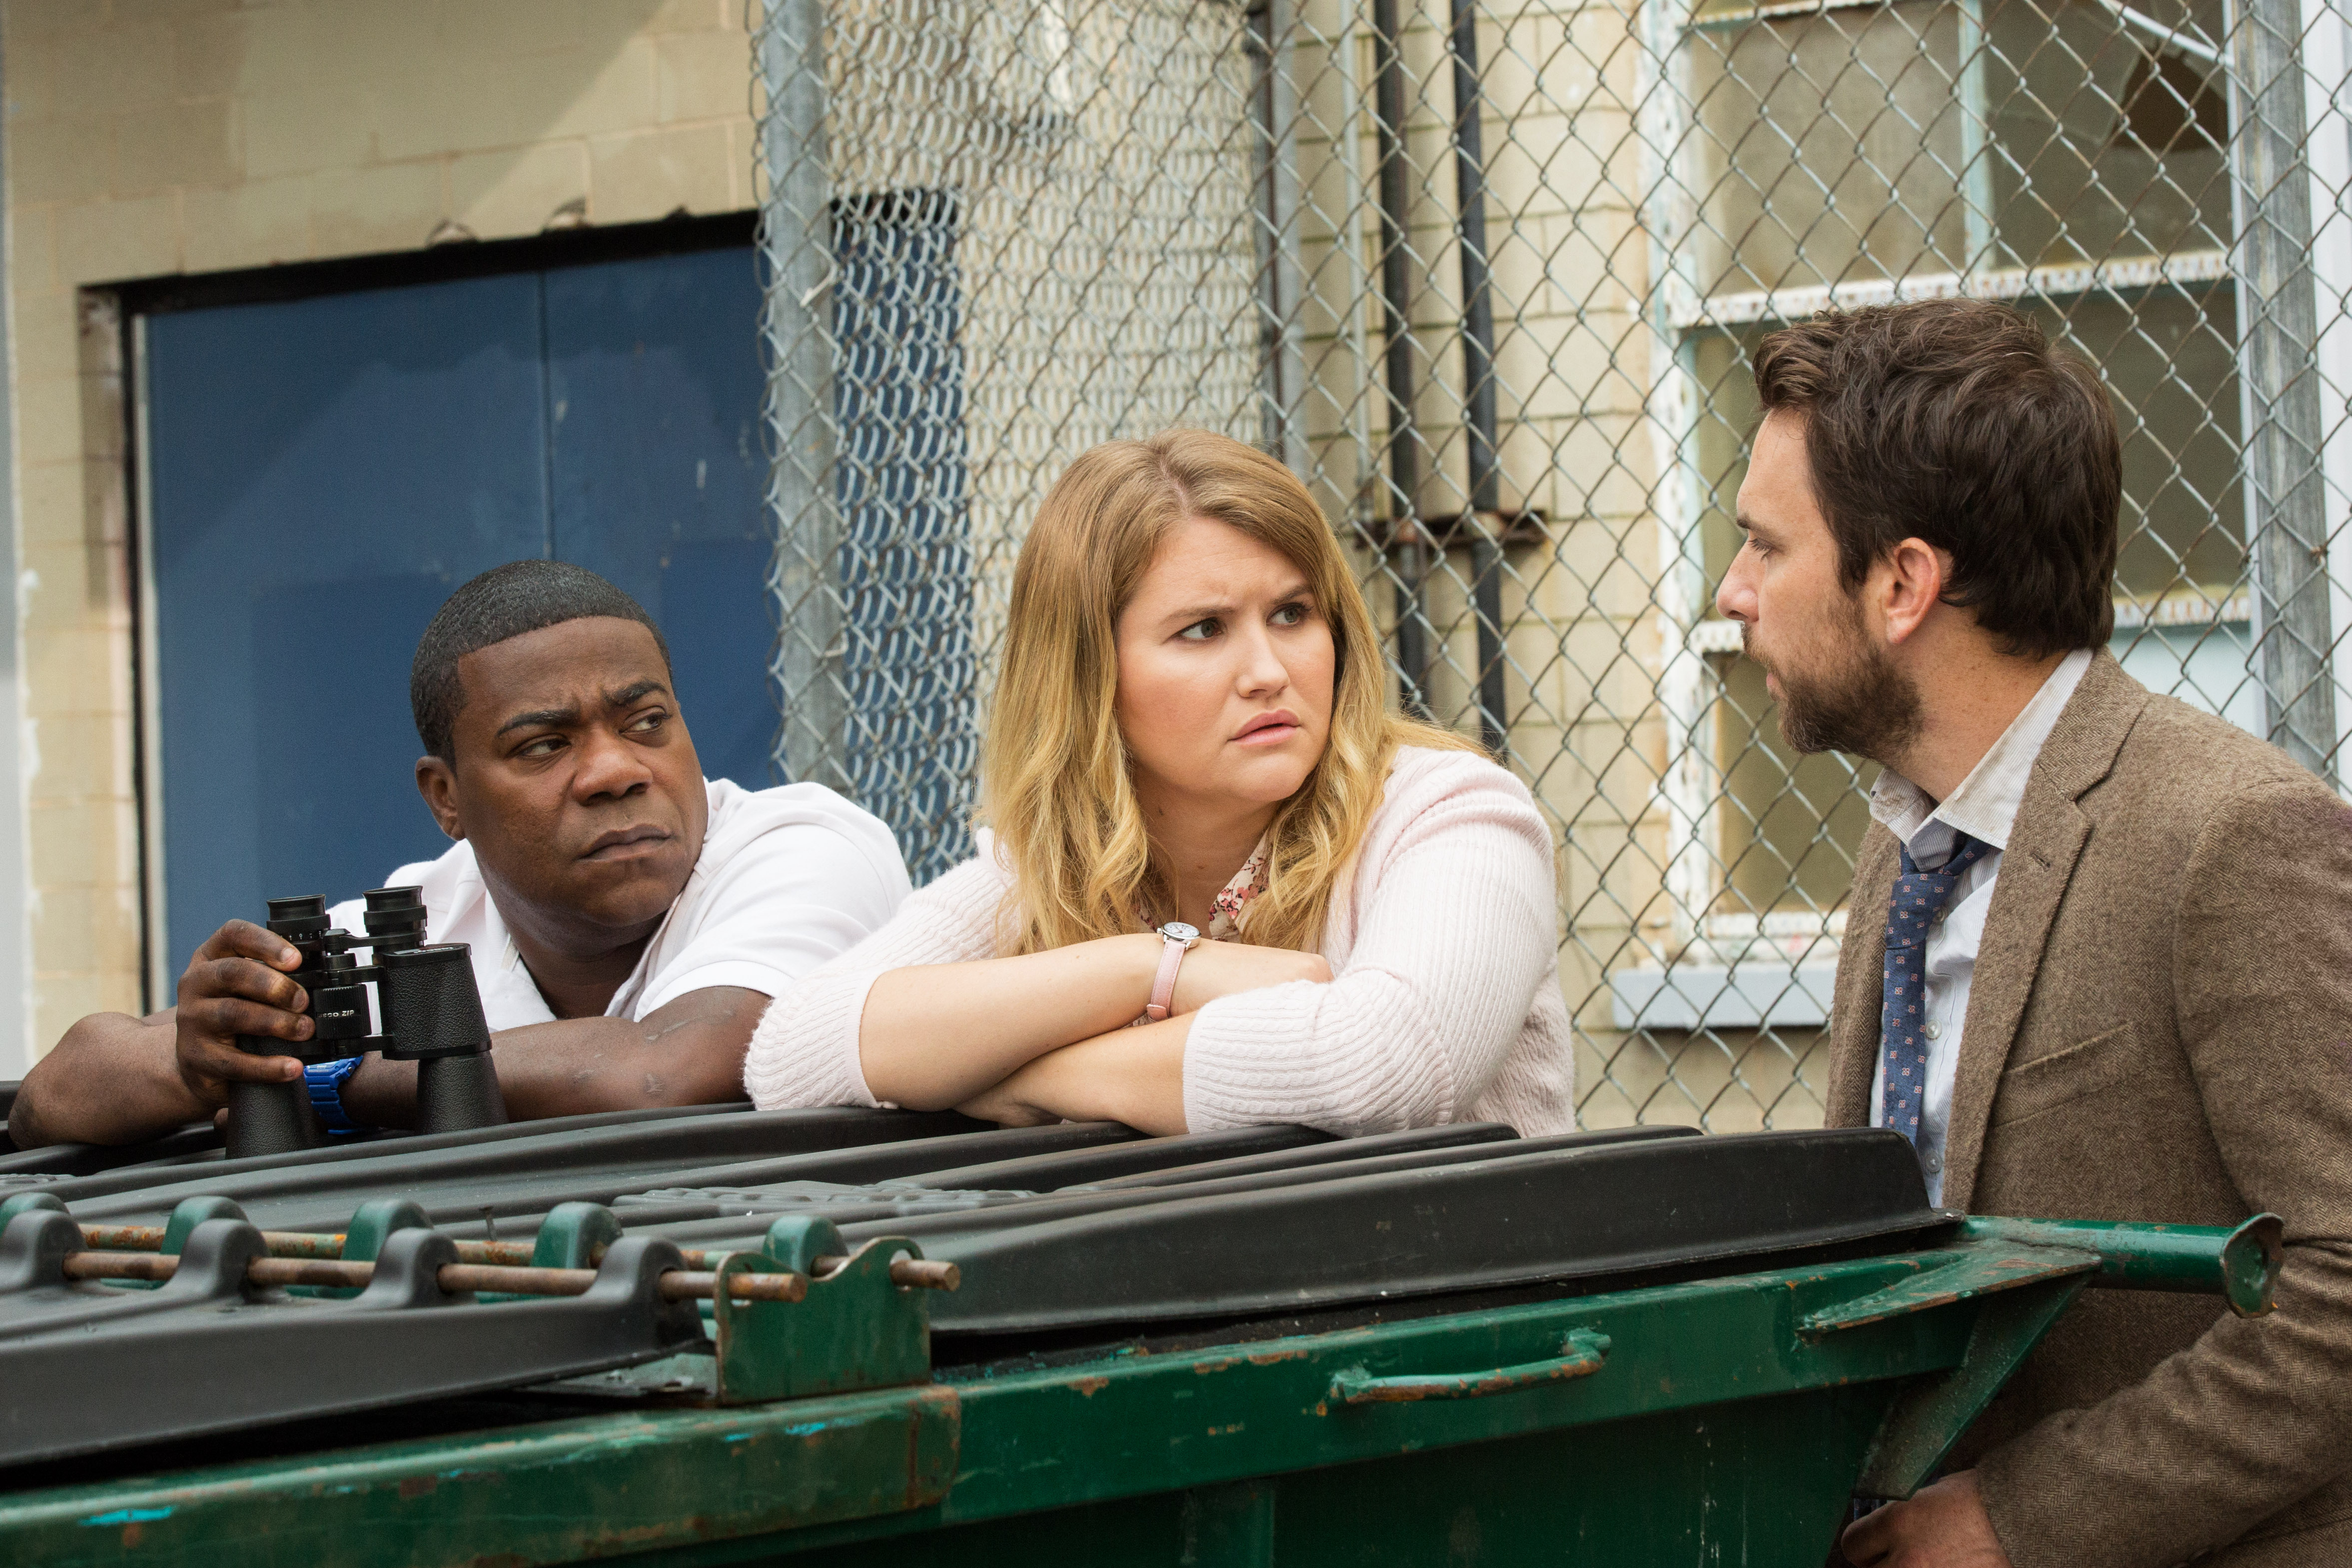 (L-R) TRACY MORGAN as Coach Crawford, JILLIAN BELL as Holly and CHARLIE DAY as Andy Campbell in the New Line Cinema and Village Roadshow Pictures comedy "FIST FIGHT," a Warner Bros. Pictures release.